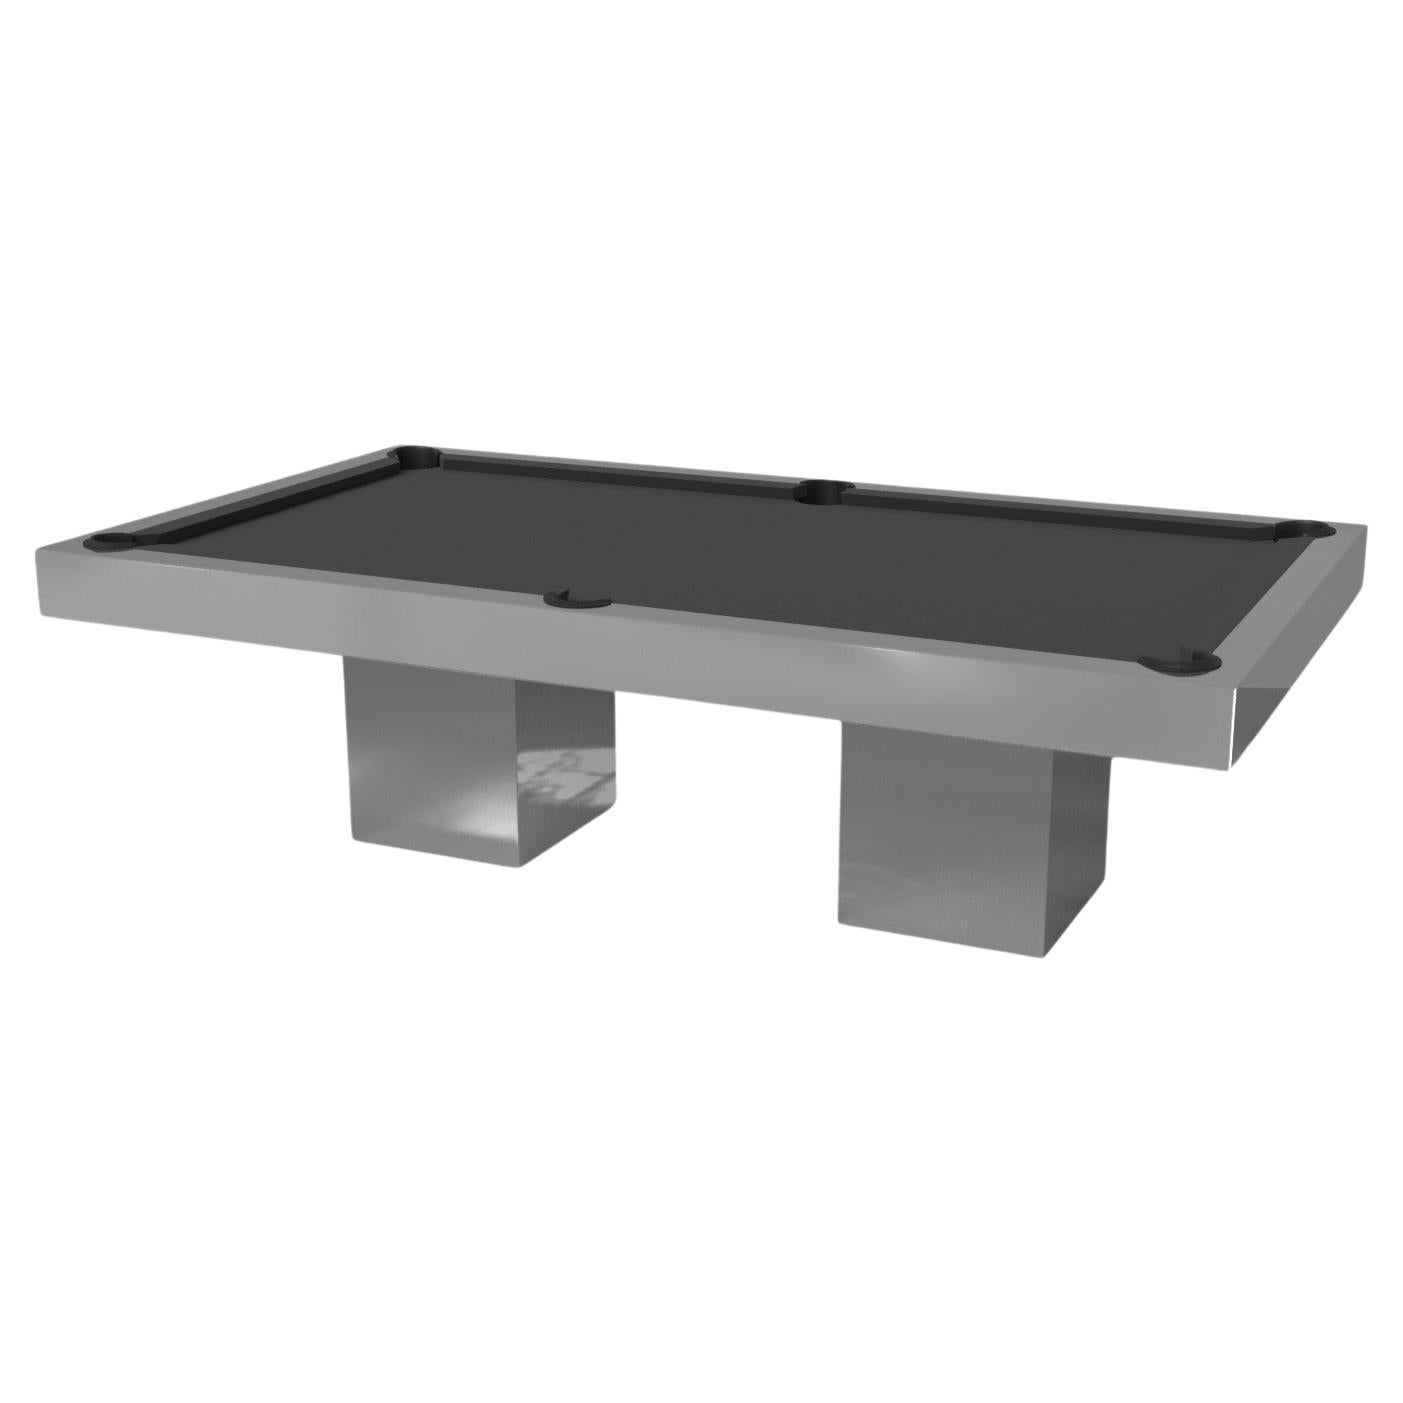 Elevate Customs Trestle Pool Table / Stainless Steel Metal in 8.5' - Made in USA